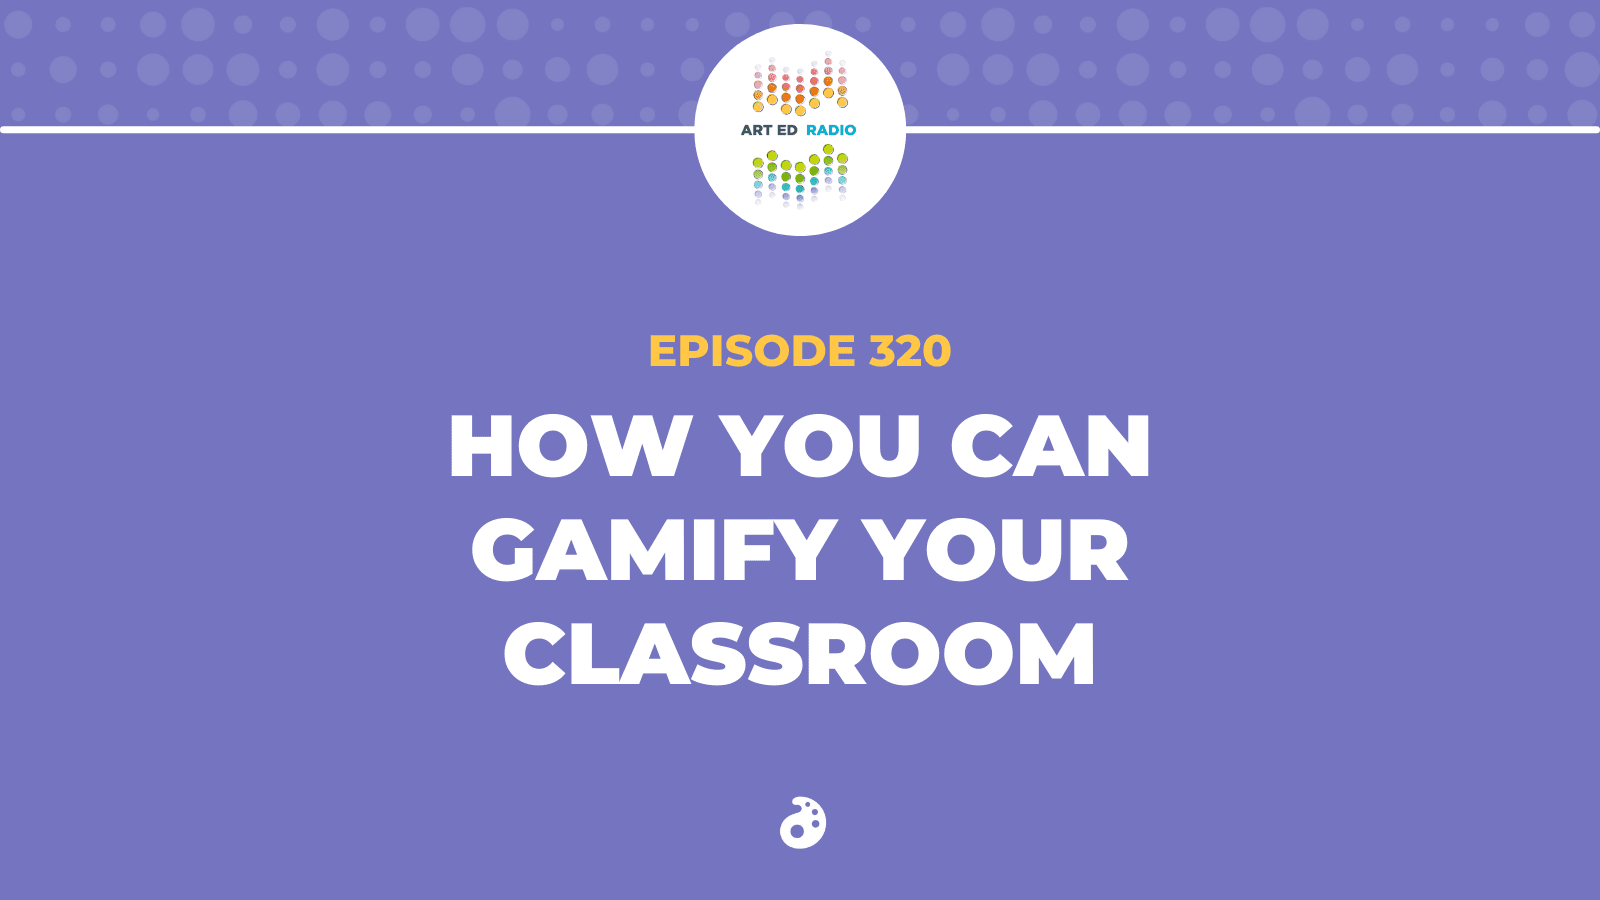 Gamifying the classroom is a bad idea